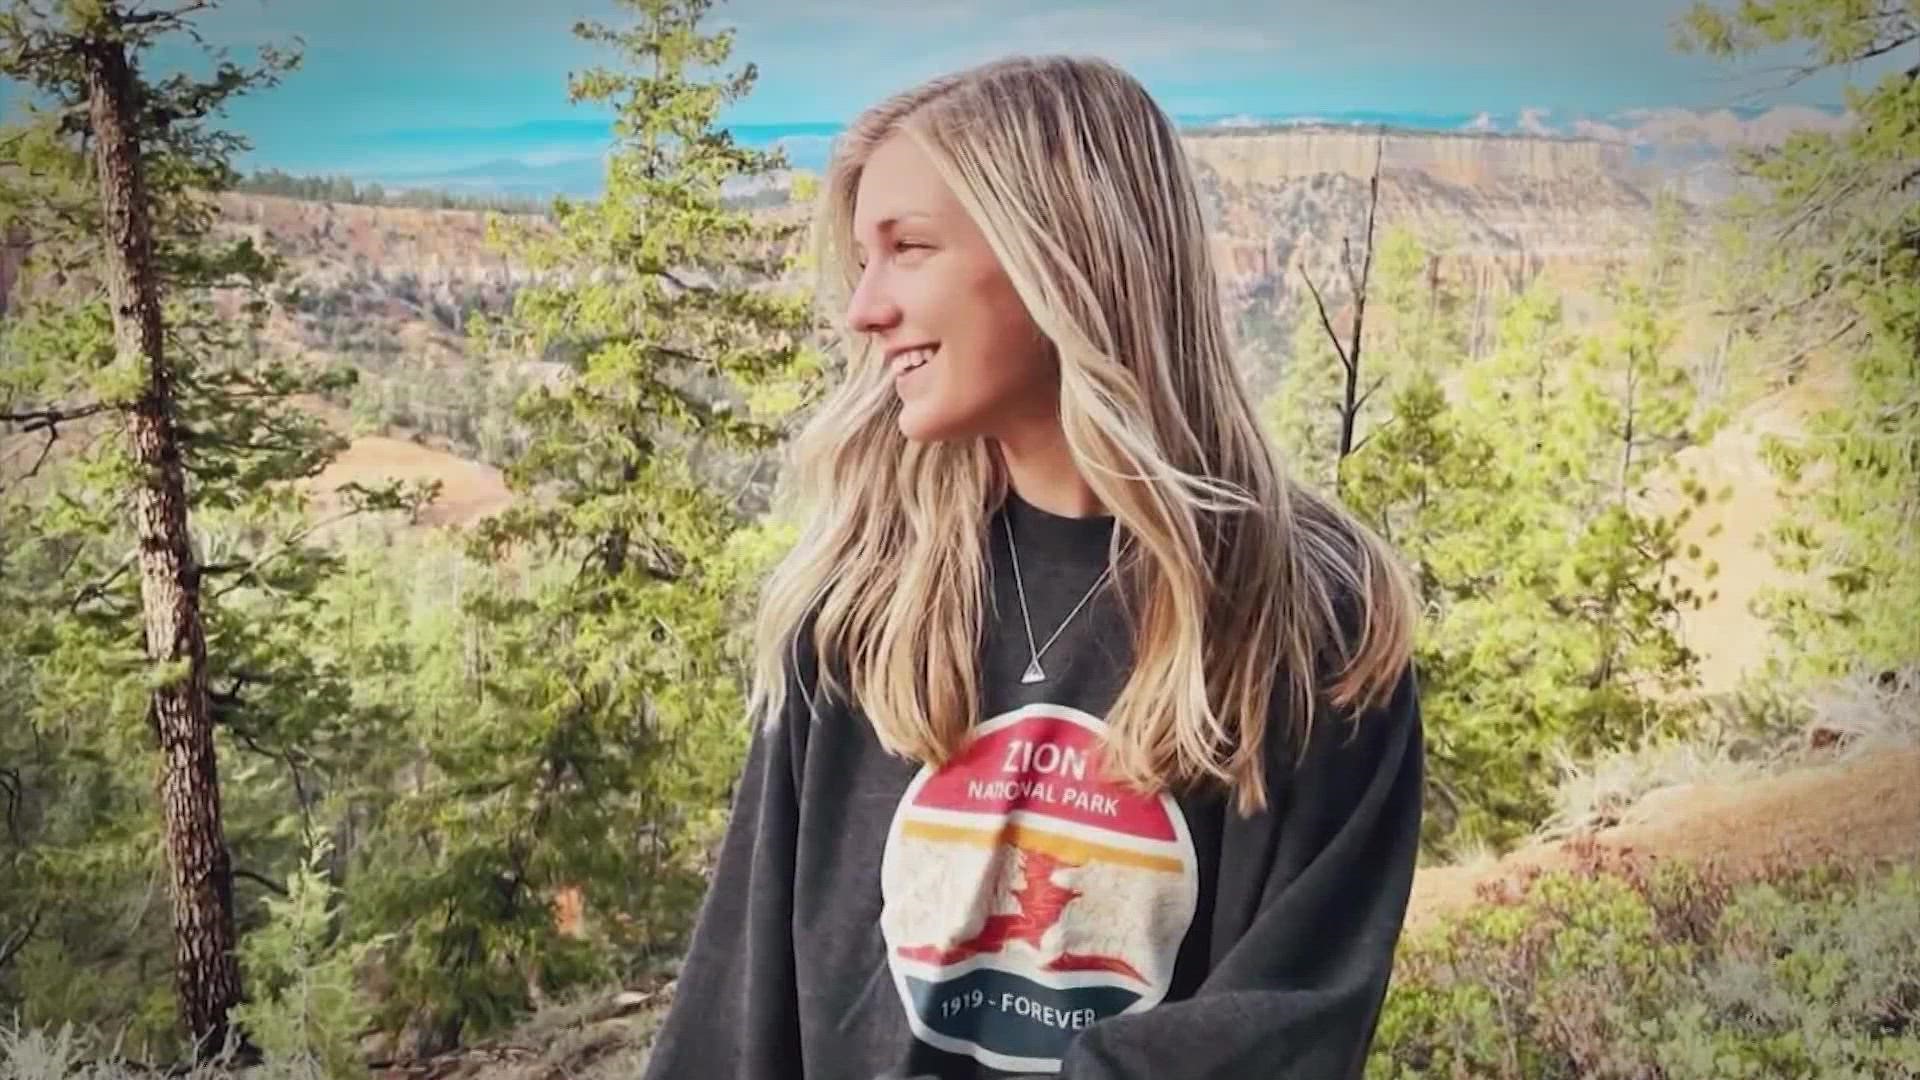 The 22-year-old's body was found last month in the section of Bridger-Teton National Forest. County Coroner Dr. Brent Blue says she died 3-4 weeks beforehand.